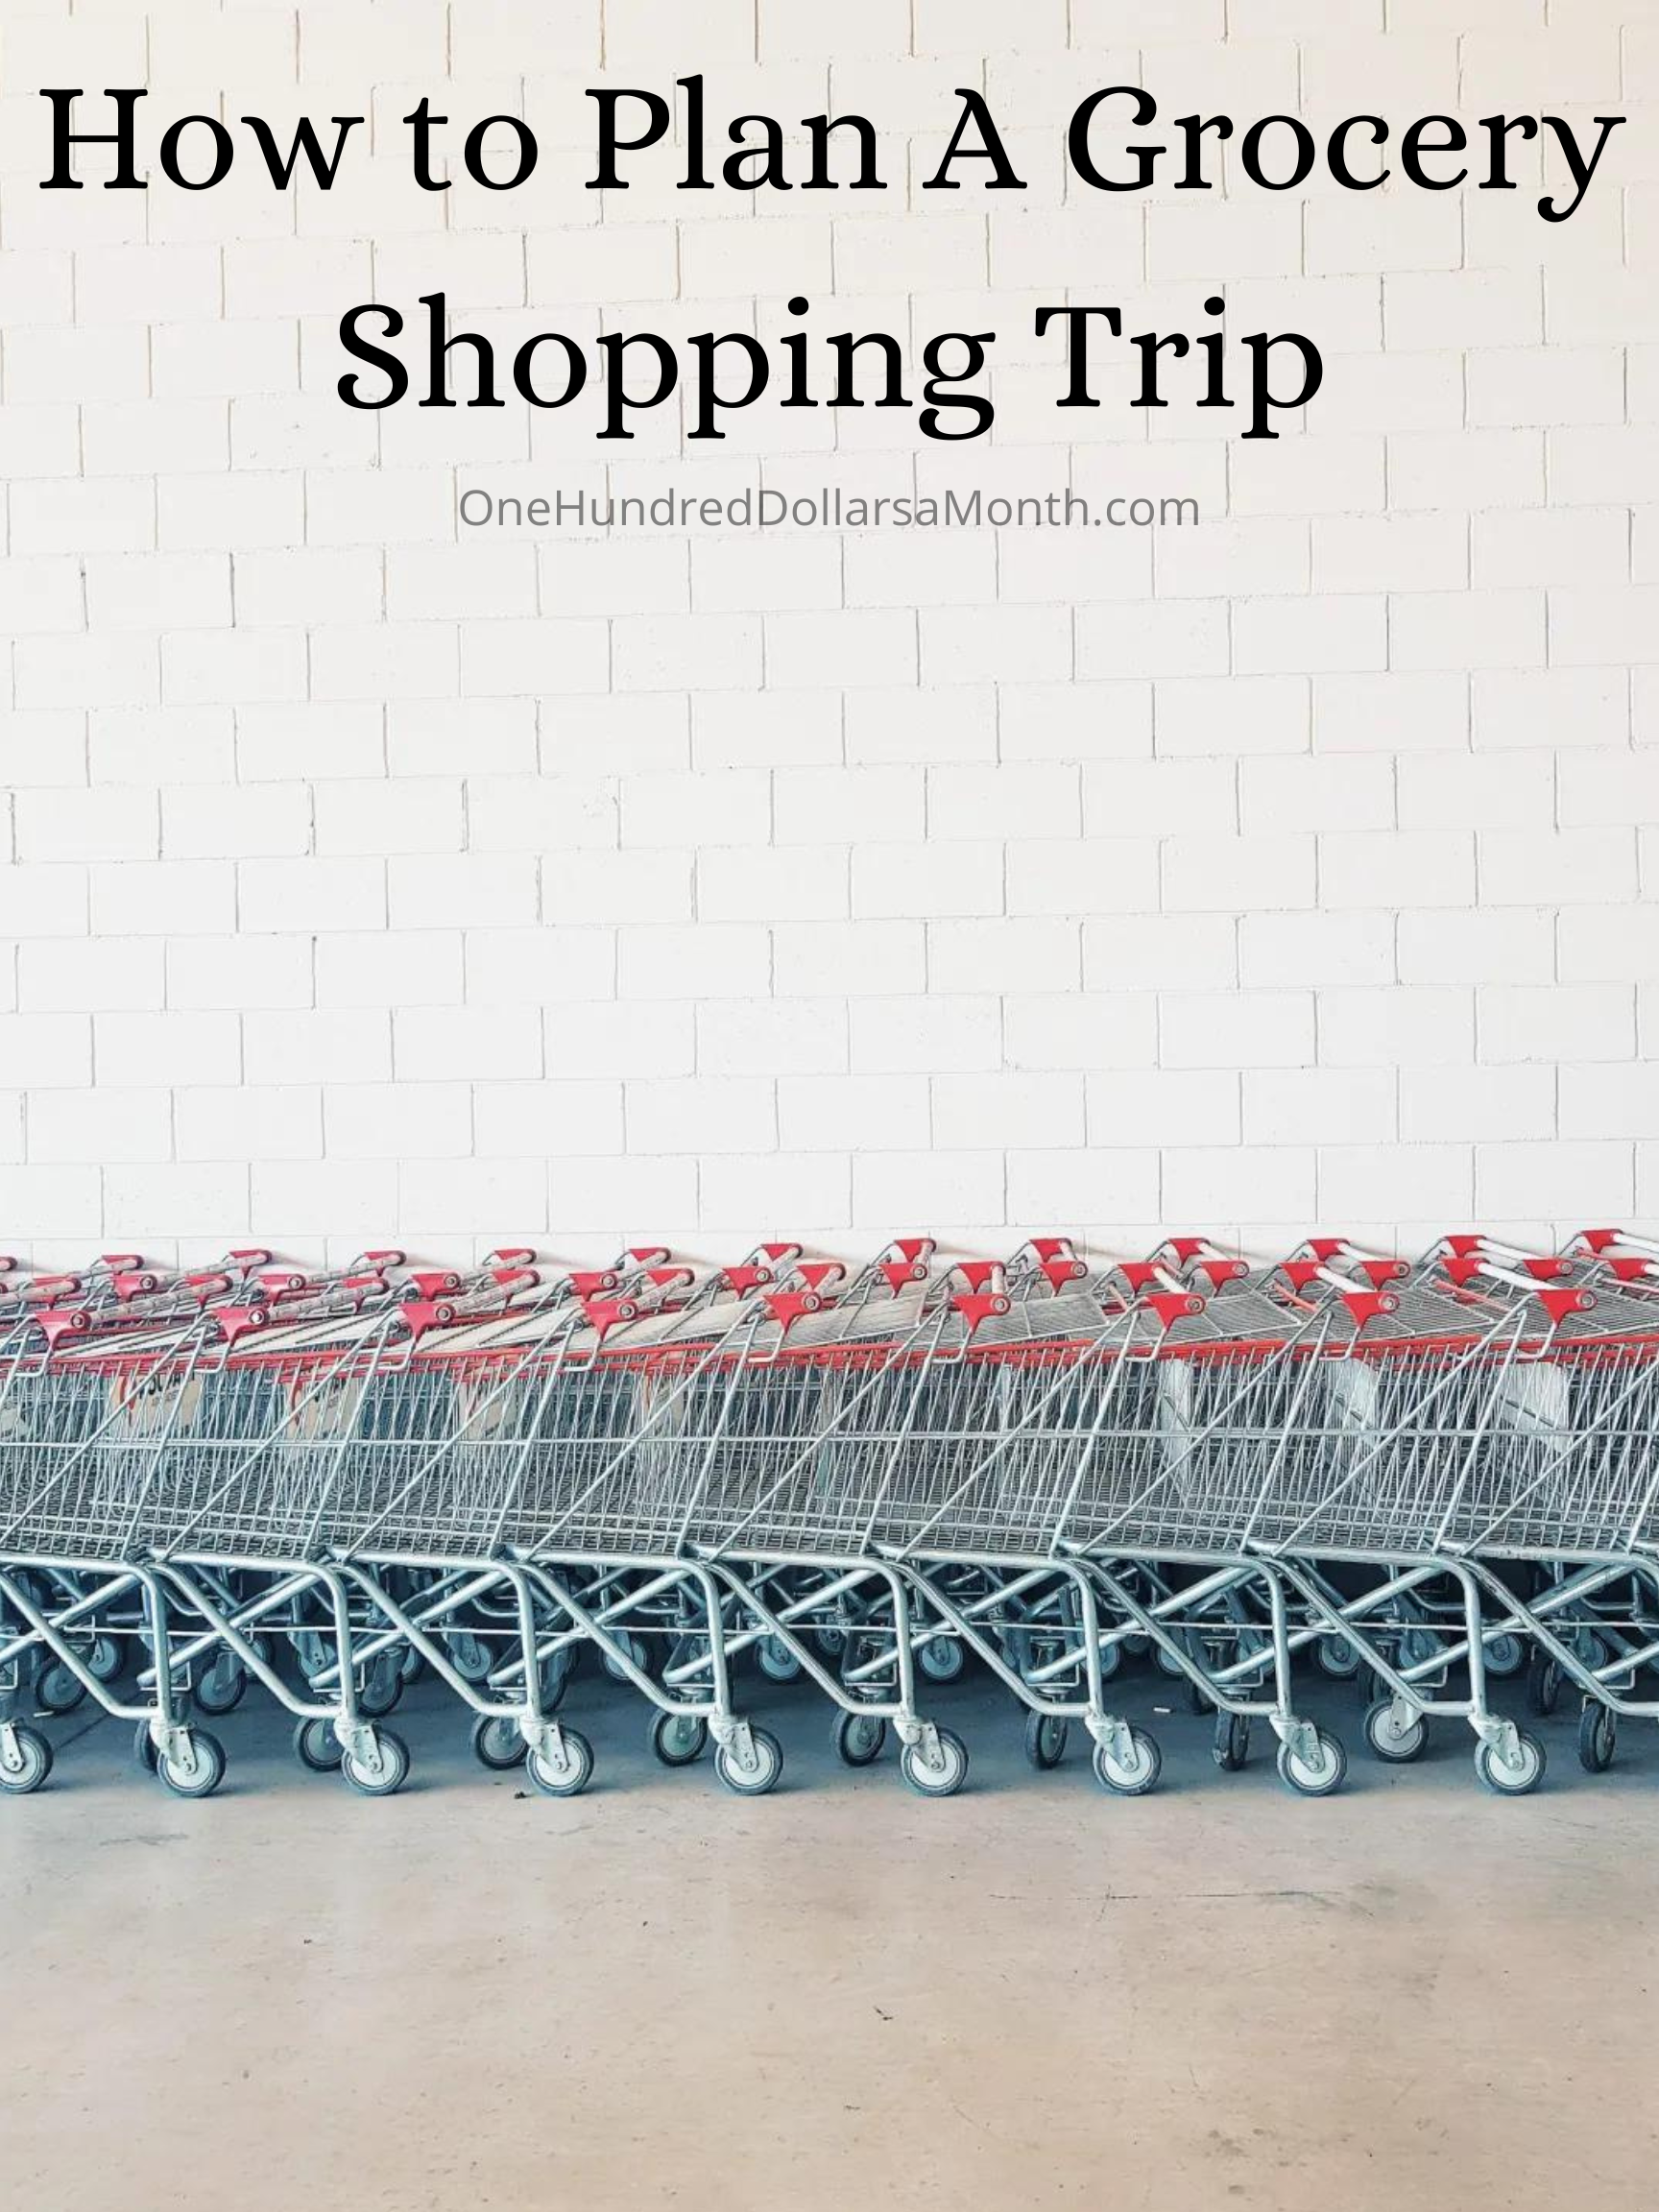 How to Plan A Grocery Shopping Trip